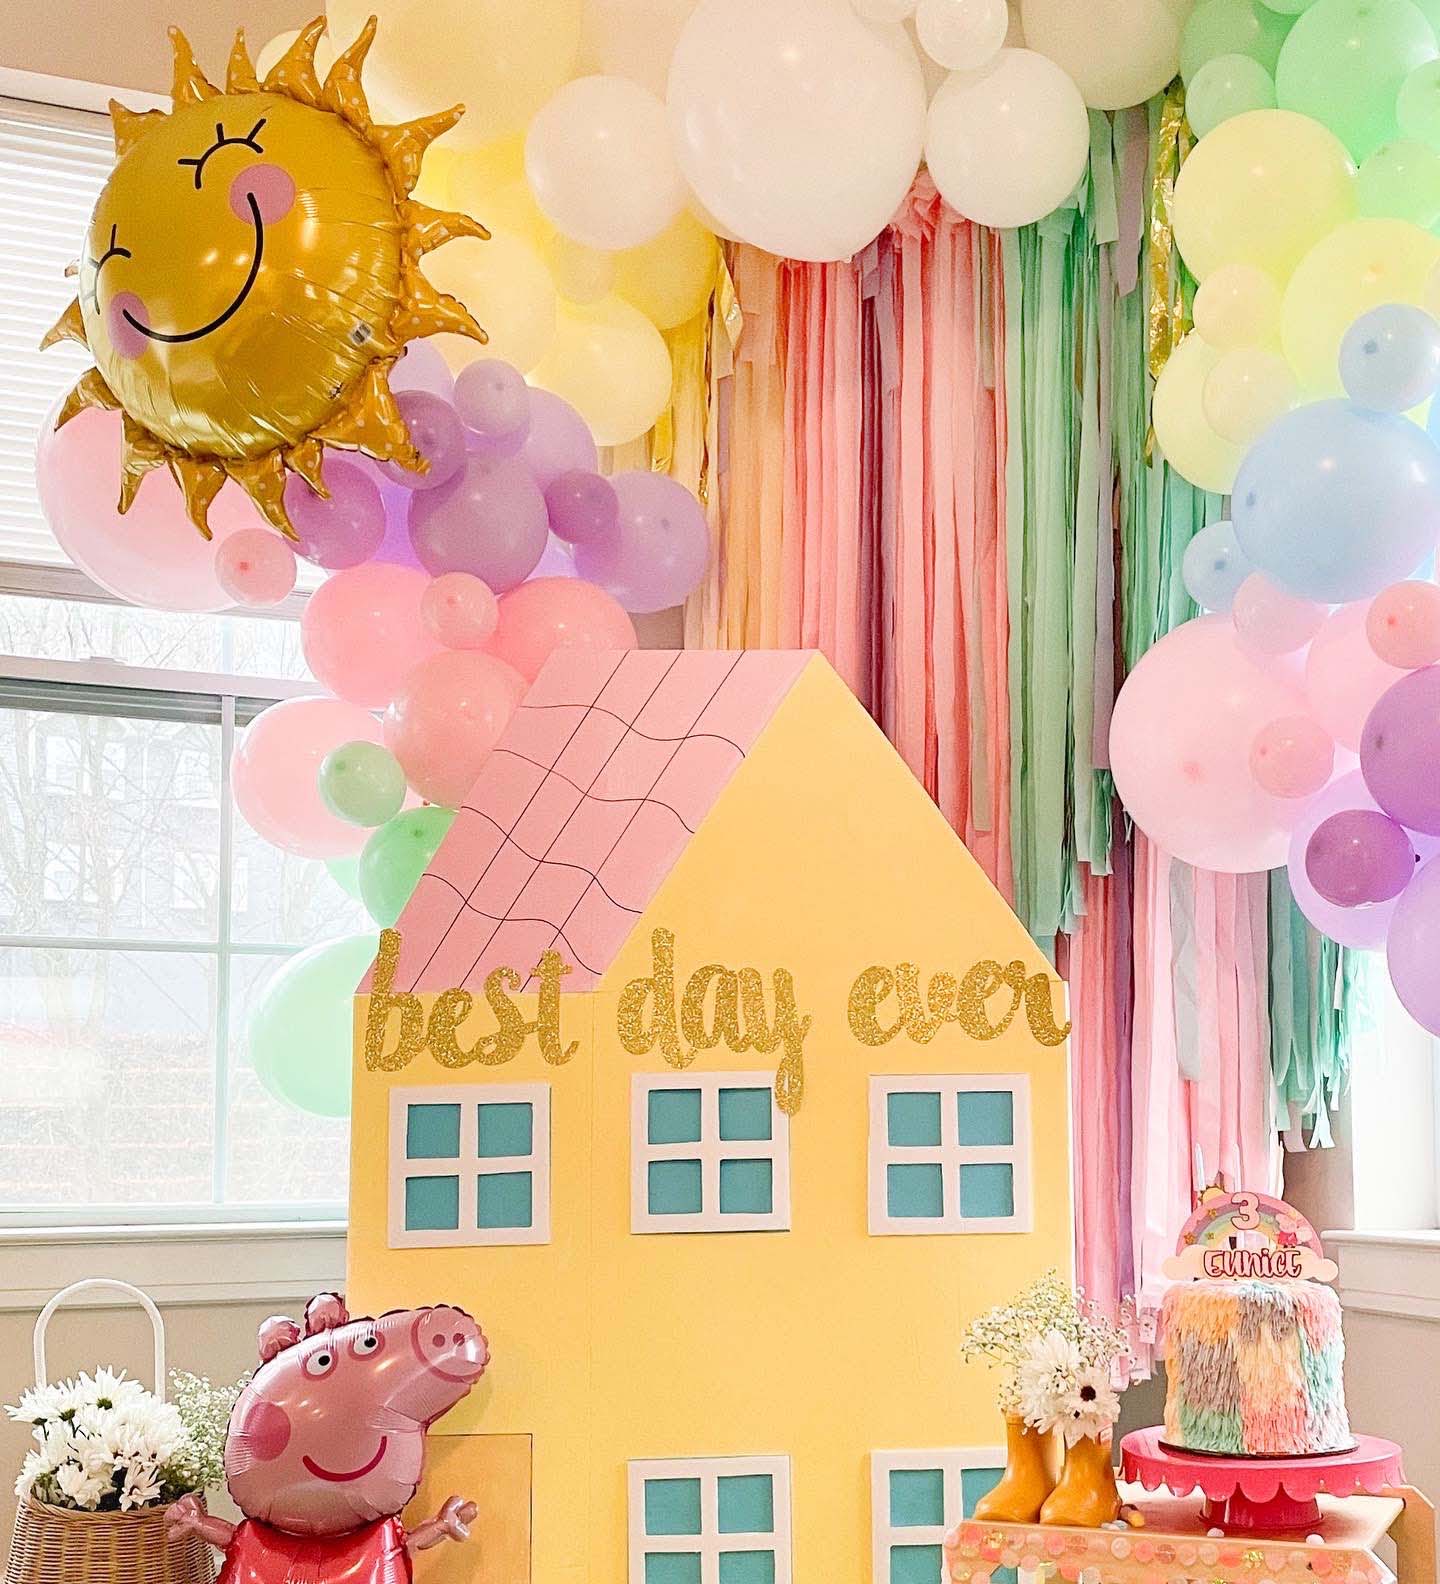 Treasures Gifted Officially Licensed Peppa Pig Birthday Party Supplies -  Peppa Pig Backdrop - 4.25ft Tall x 6ft Wide Peppa Pig Photo Backdrop -  Peppa